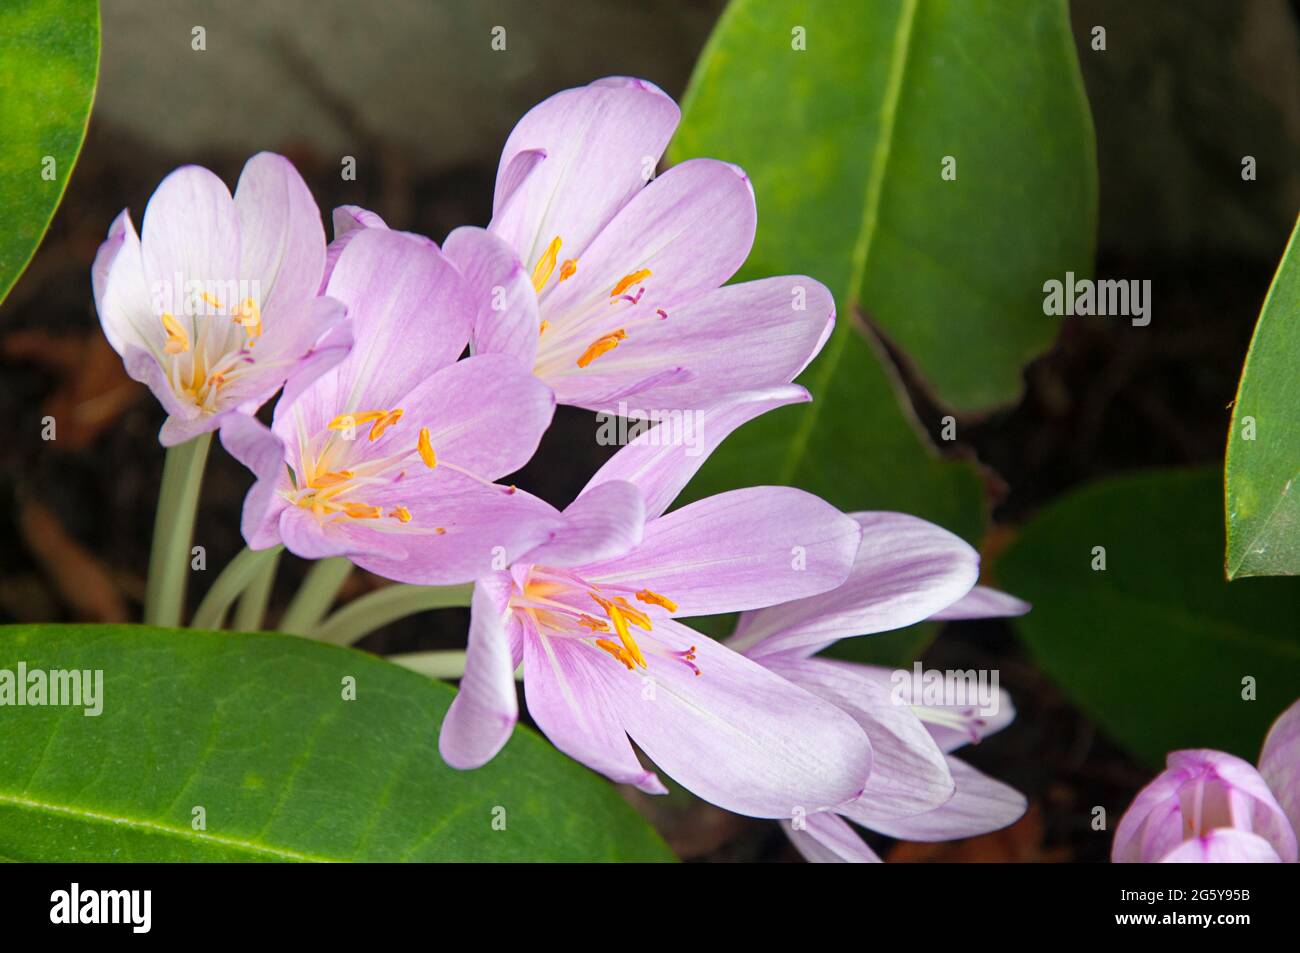 Purple autumn crocus flower, known as Colchicum autumnale, meadow saffron, or Colchicaceae.  Stunning garden plant blooms in late summer in this close Stock Photo